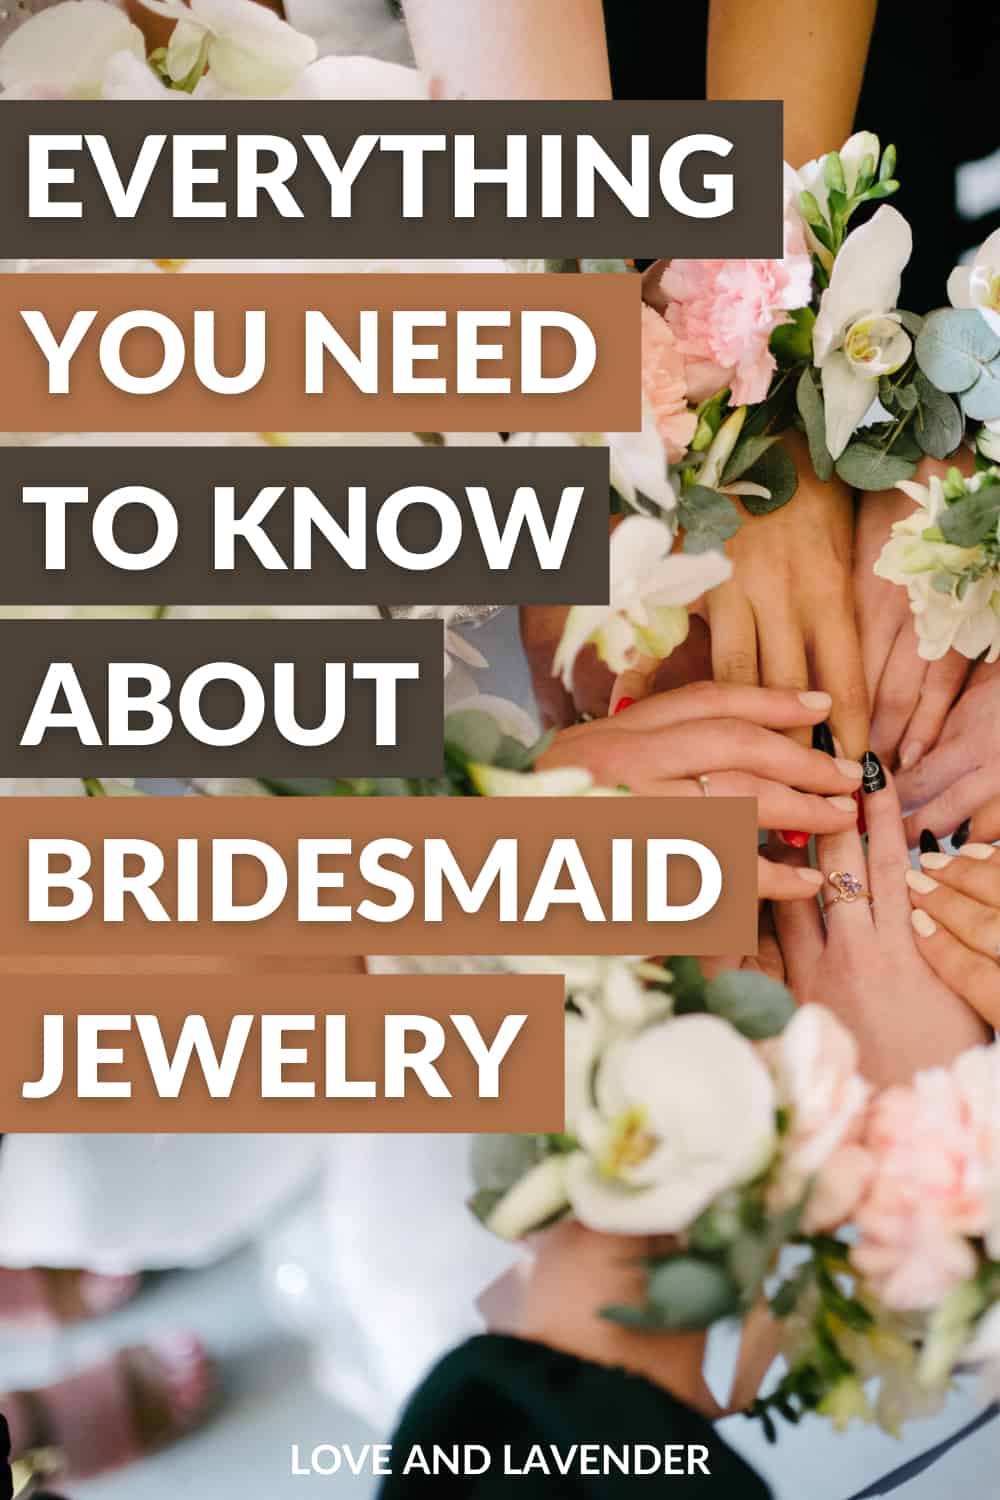 Pinterest pin - Everything You Need To Know About Bridesmaid Jewelry